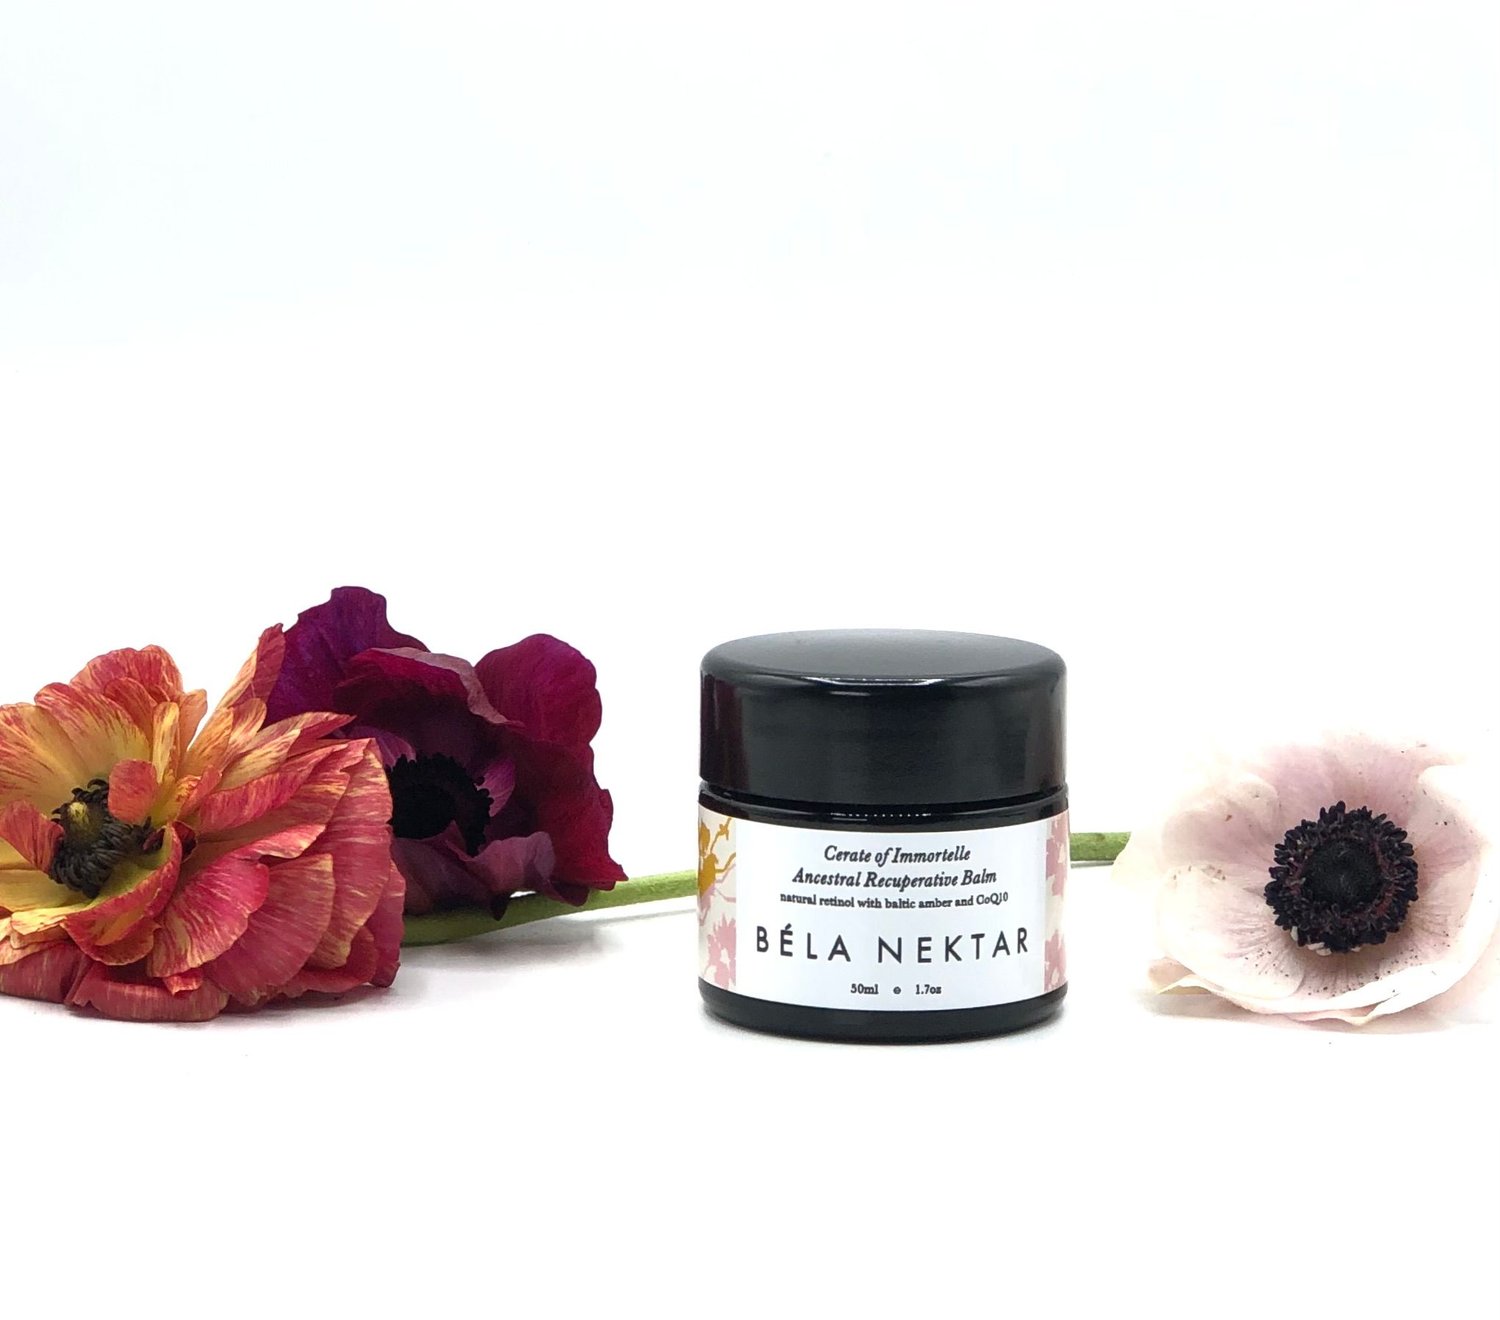 Cerate of Immortelle Ancestral Recuperative Balm: Natural Retinol with  Baltic Amber and CoQ10 — BÉLA NEKTAR